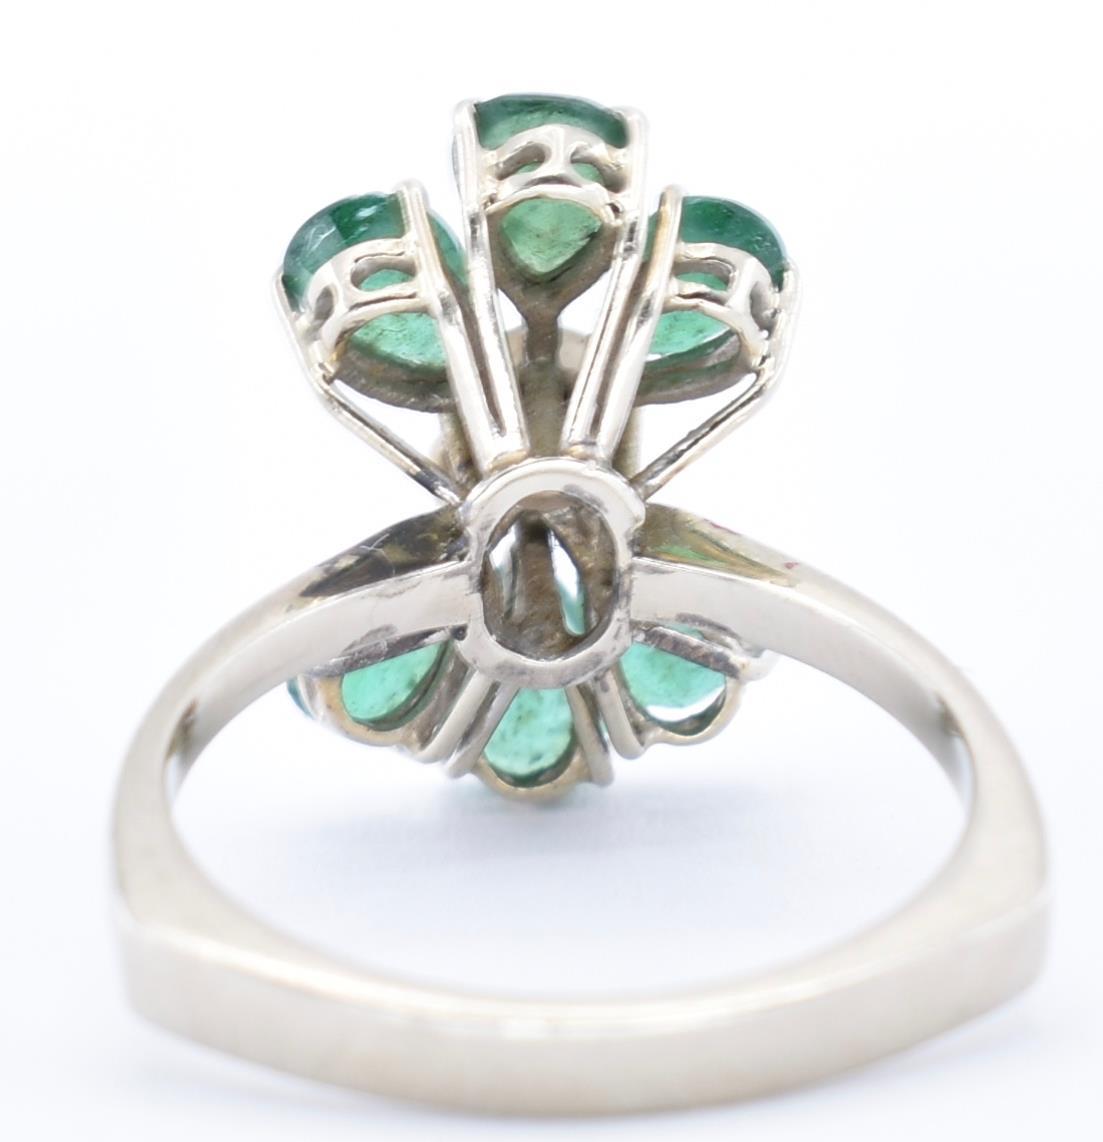 AN 18CT GOLD EMERALD AND DIAMOND CLUSTER RING - Image 3 of 6